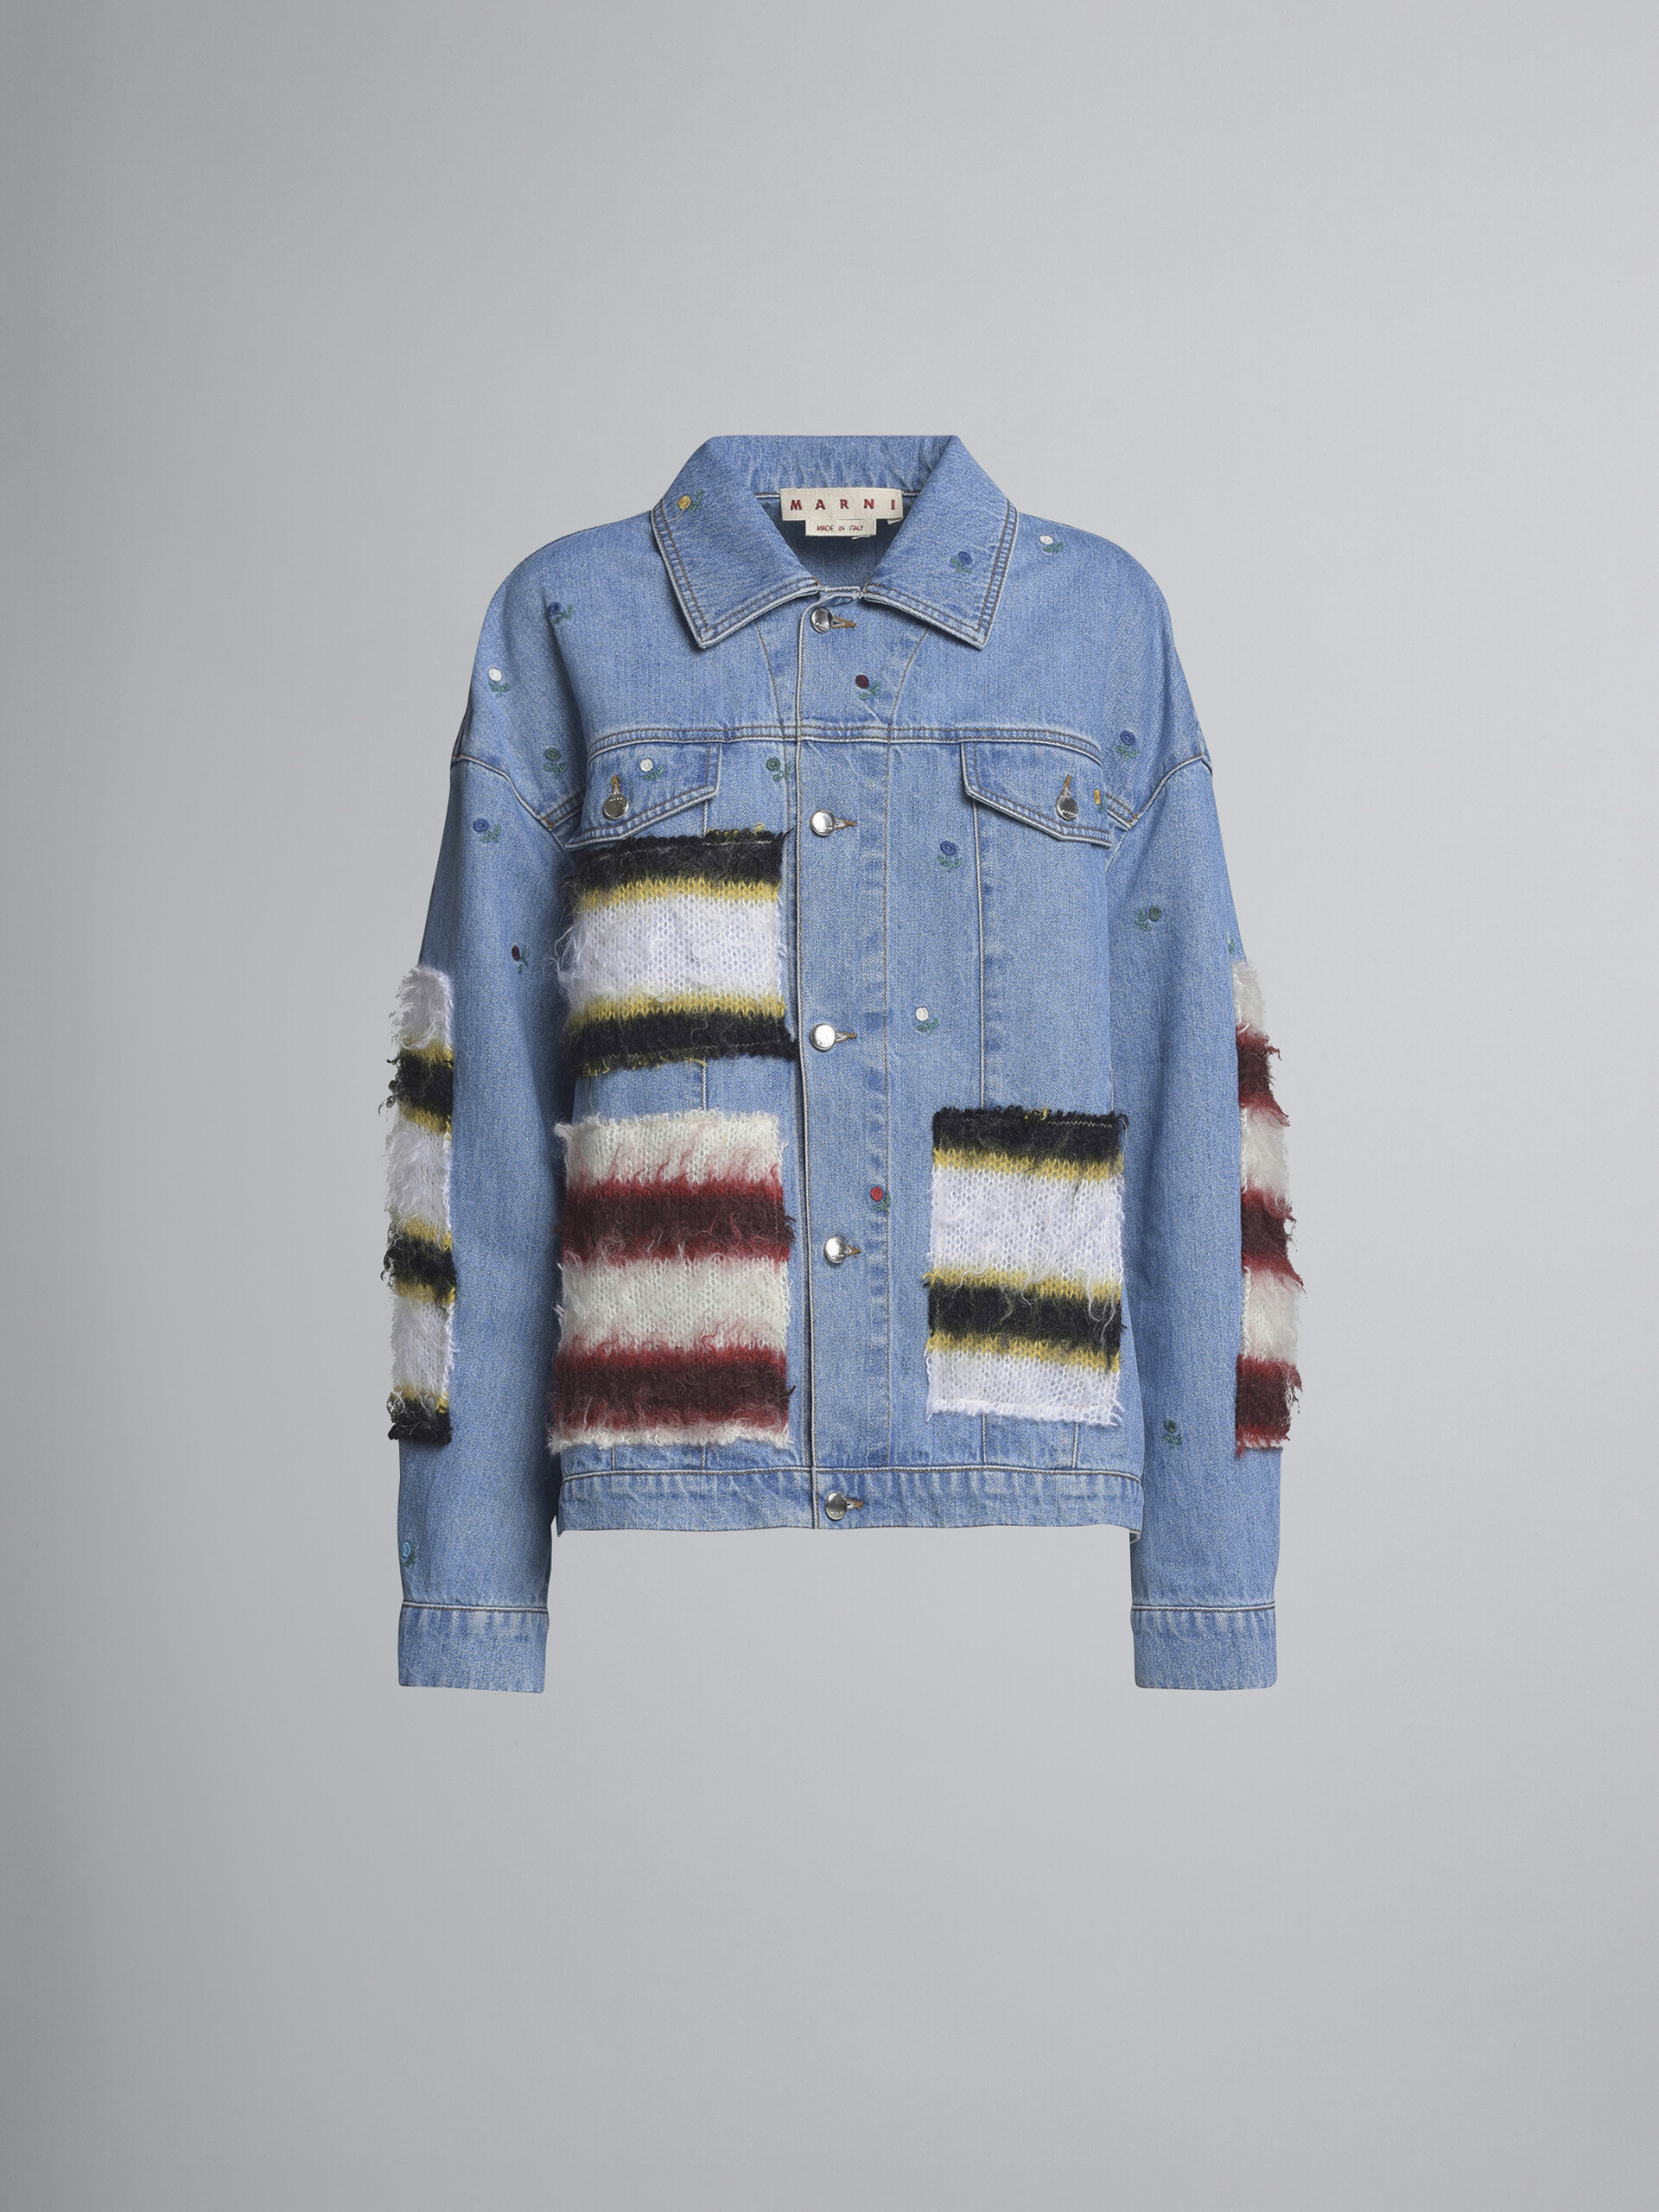 Mohair and denim jacket - Jackets - Image 1